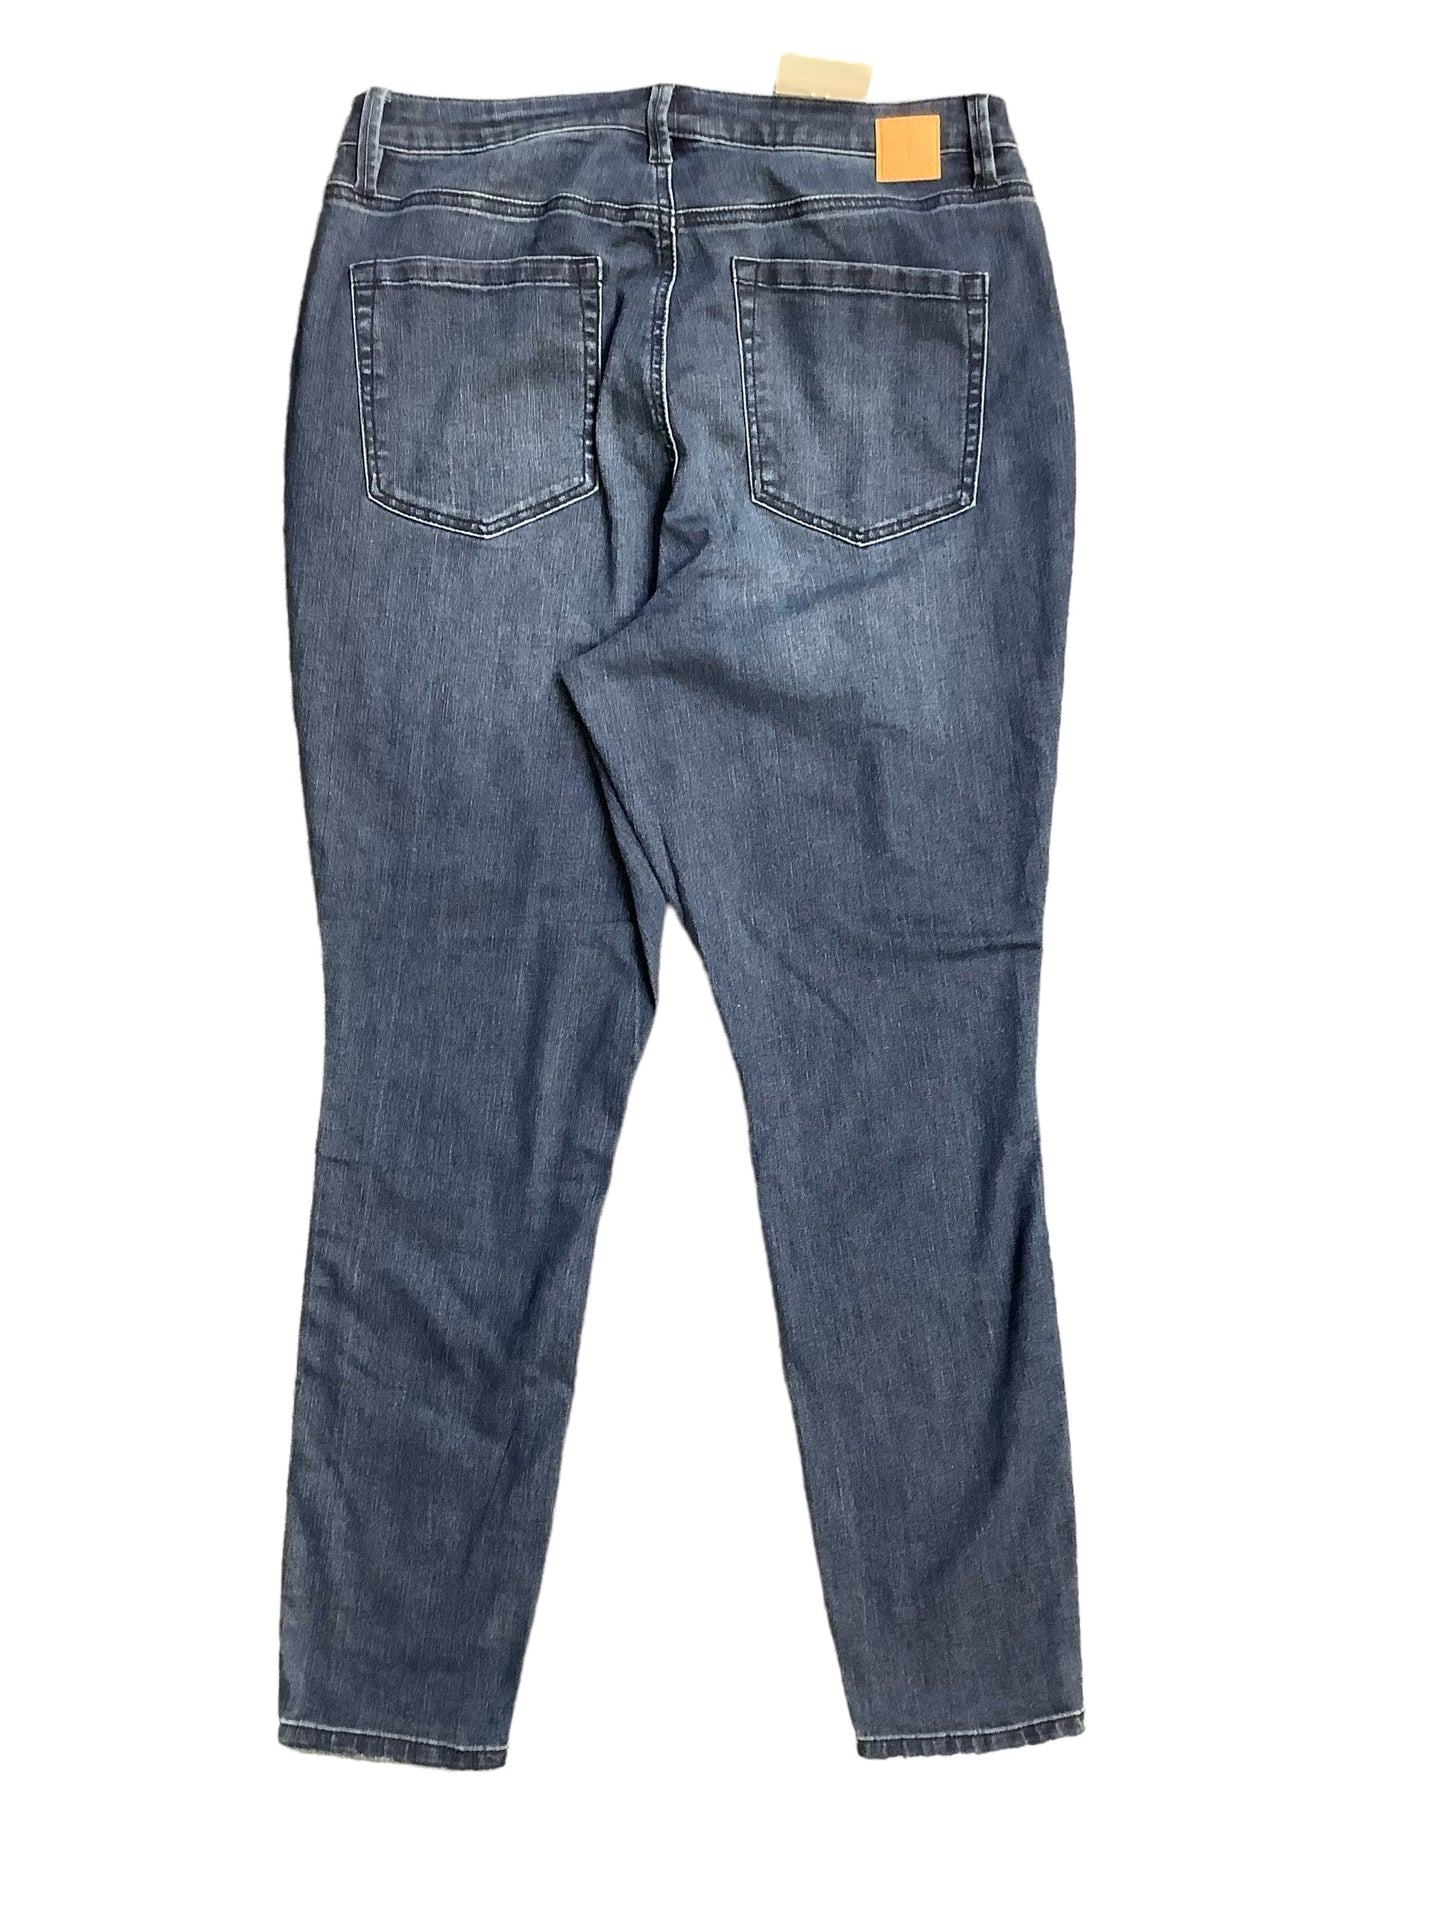 Jeans Straight By Clothes Mentor  Size: 16W